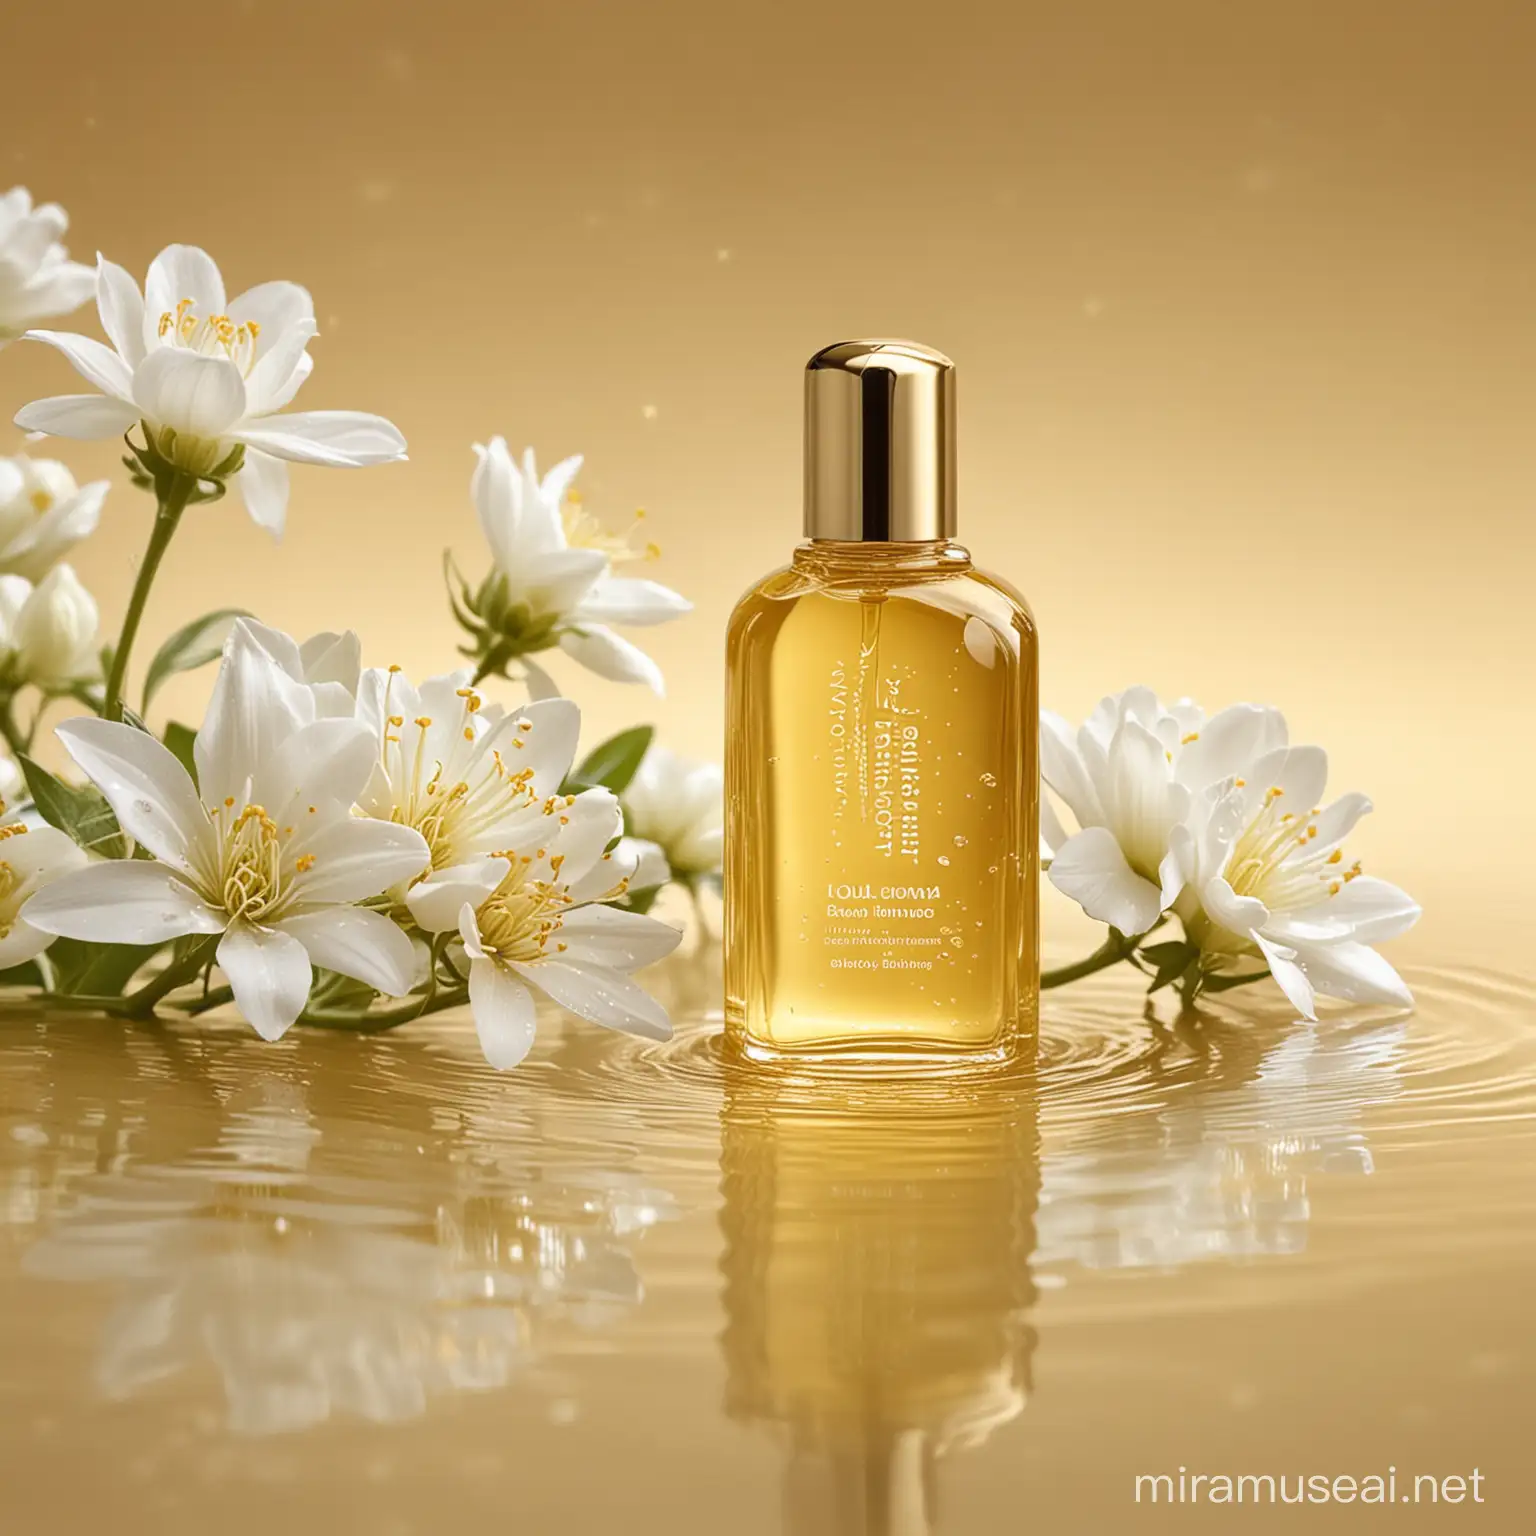 Golden Moisturizer with White Flowers in Flowing Water